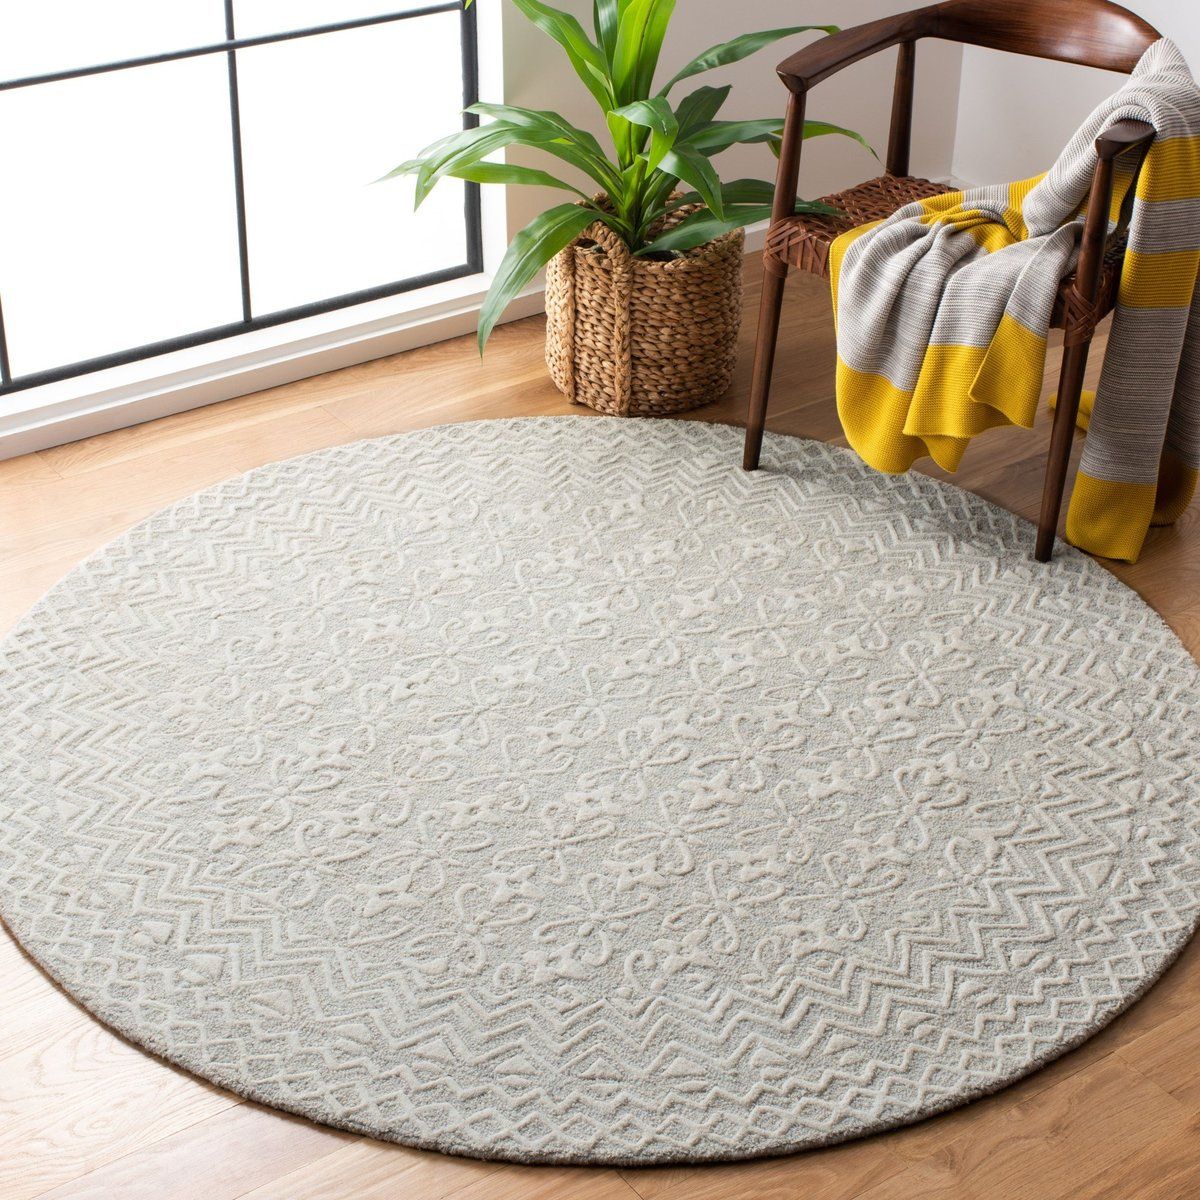 Safavieh Blossom Blm 114 Modern Wool Area Rugs | Rugs Direct Regarding Blossom Oval Rugs (Photo 9 of 15)